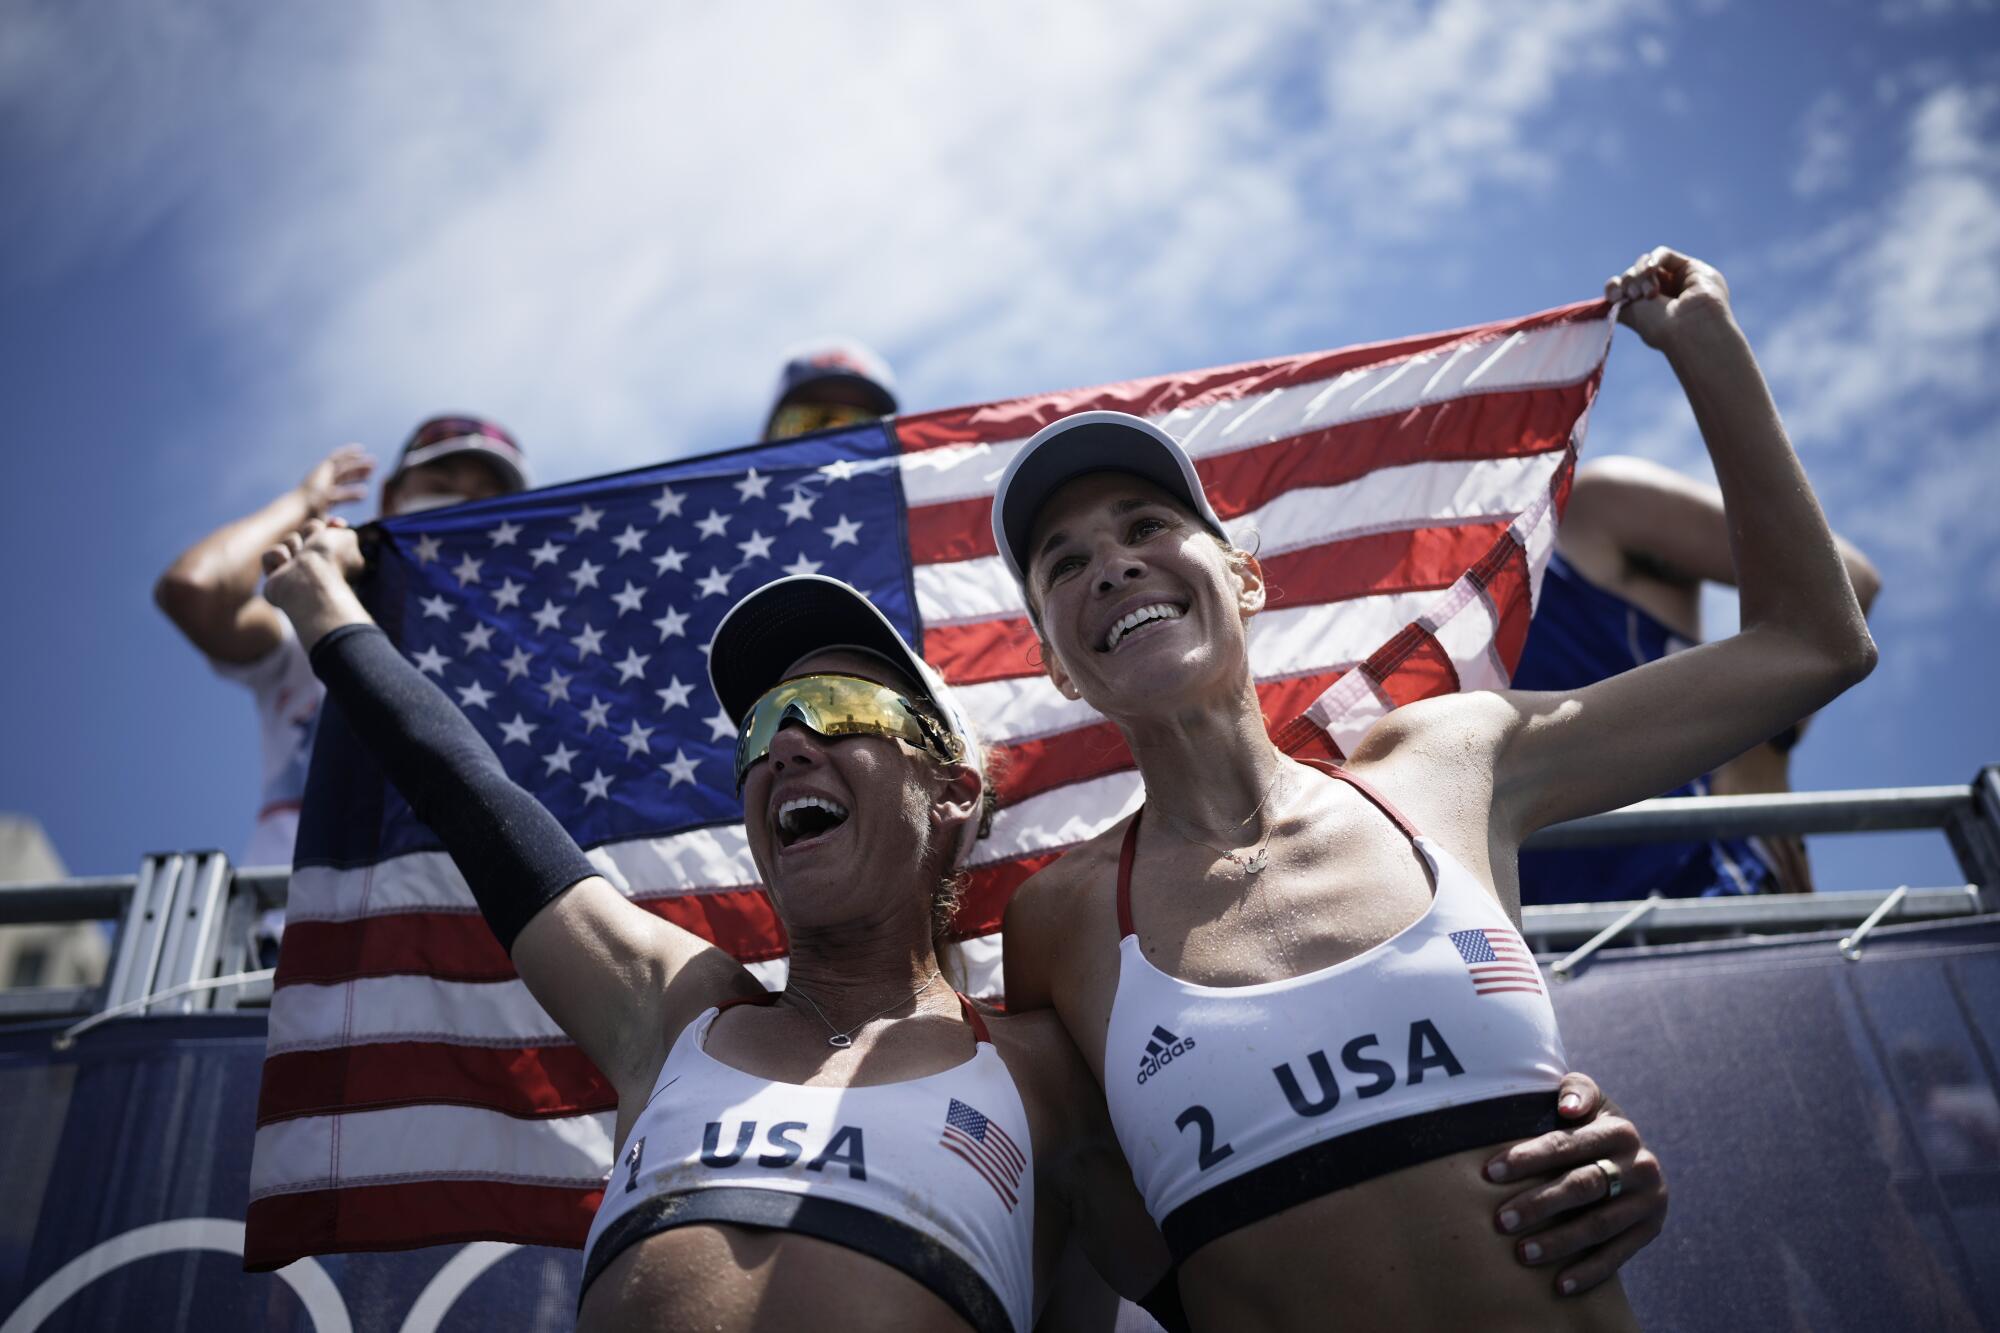 April Ross, left, and teammate Alix Klineman wearing USA jerseys as they hold up an American flag and celebrate.